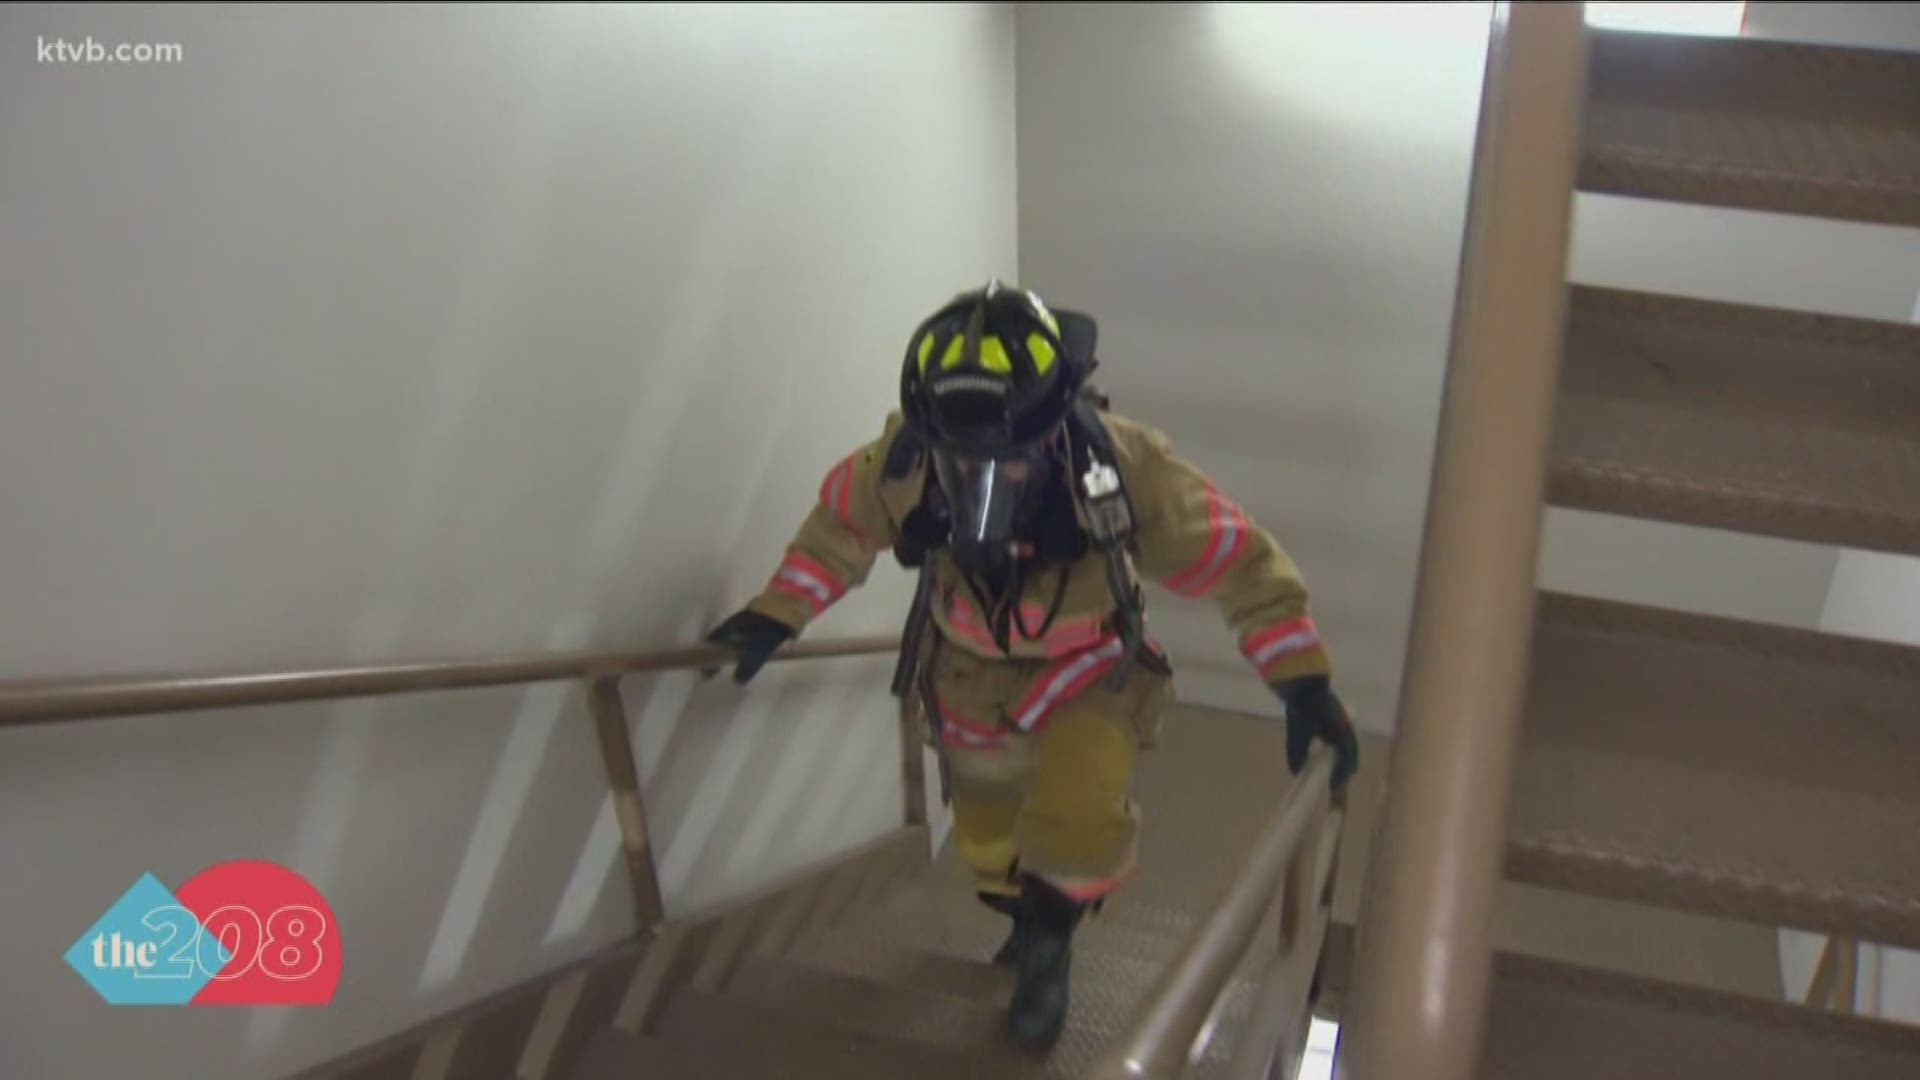 Treasure Valley firefighters prepare for the leukemia and lymphoma society firefighter stair climb in Seattle by climbing the US Bank Building in Boise.